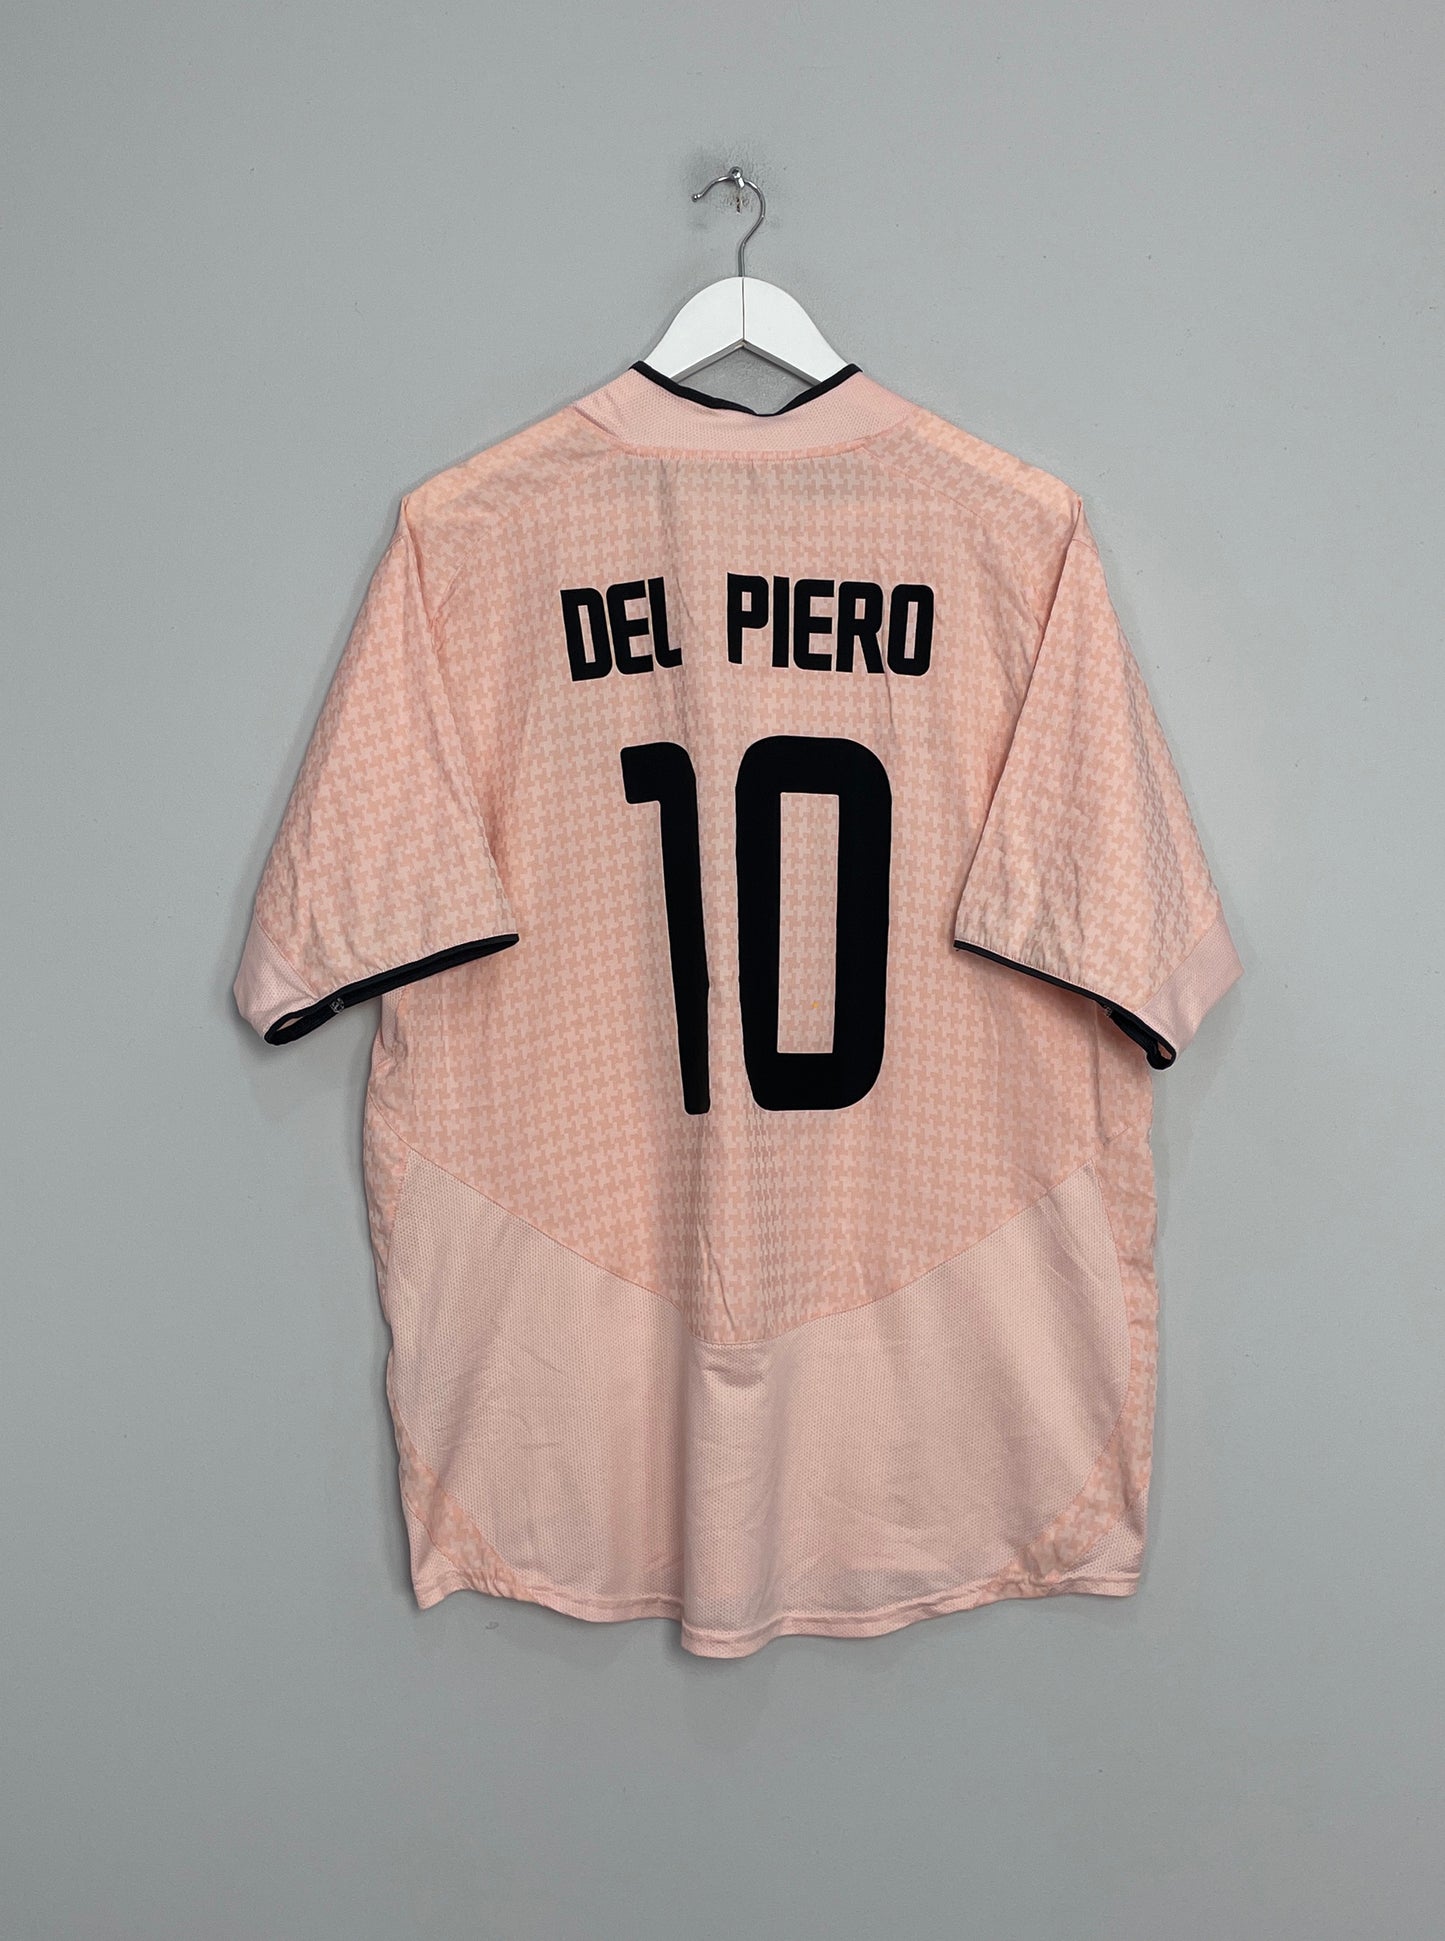 Image of the Juventus Del Piero shirt from the 2003/04 season